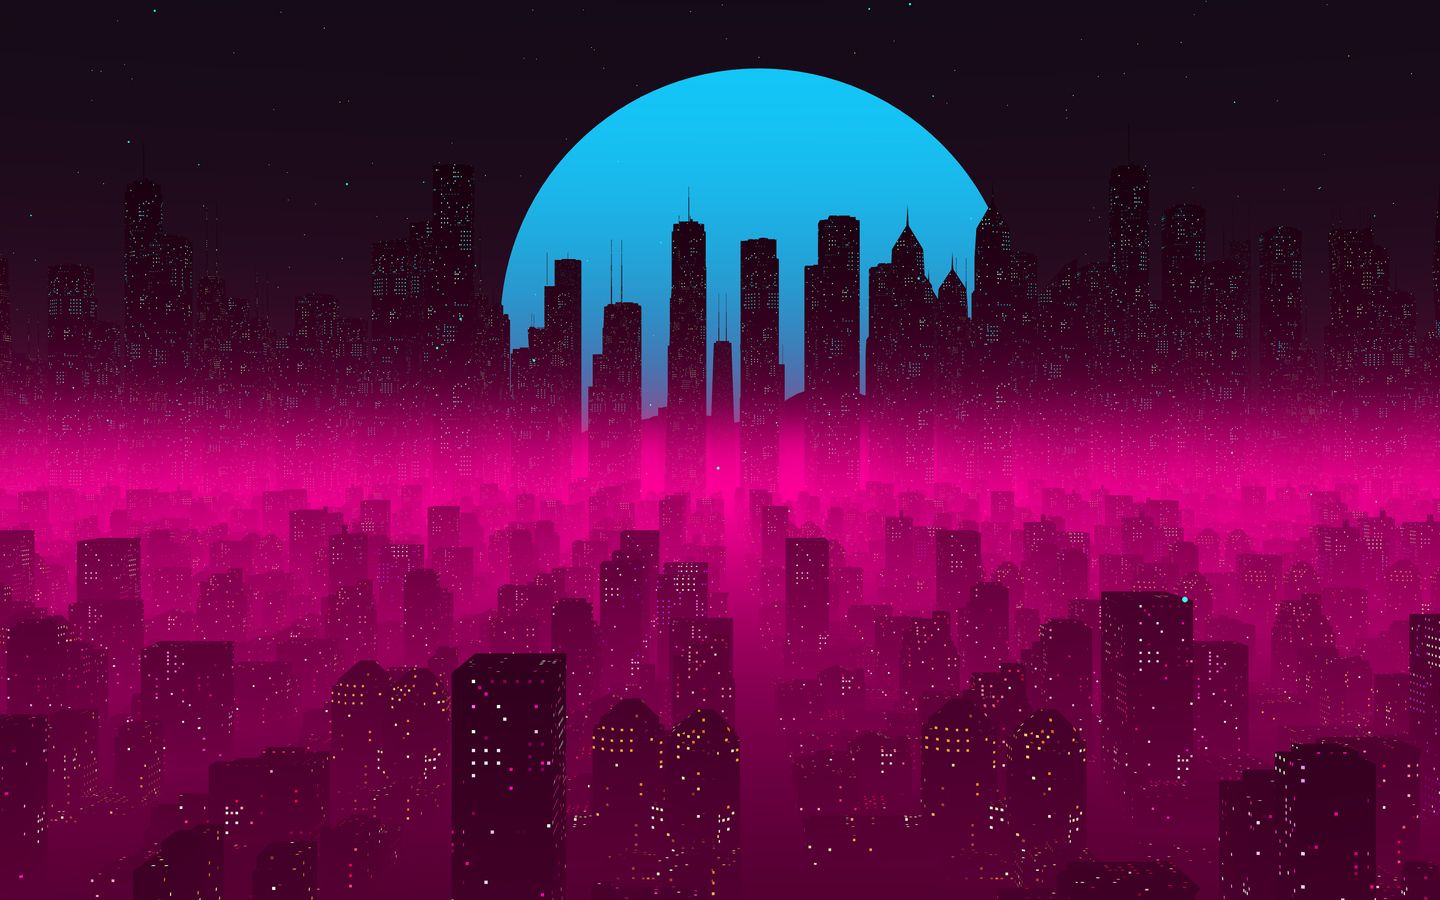 Purple And Blue Retro City Wallpapers Wallpaper Cave